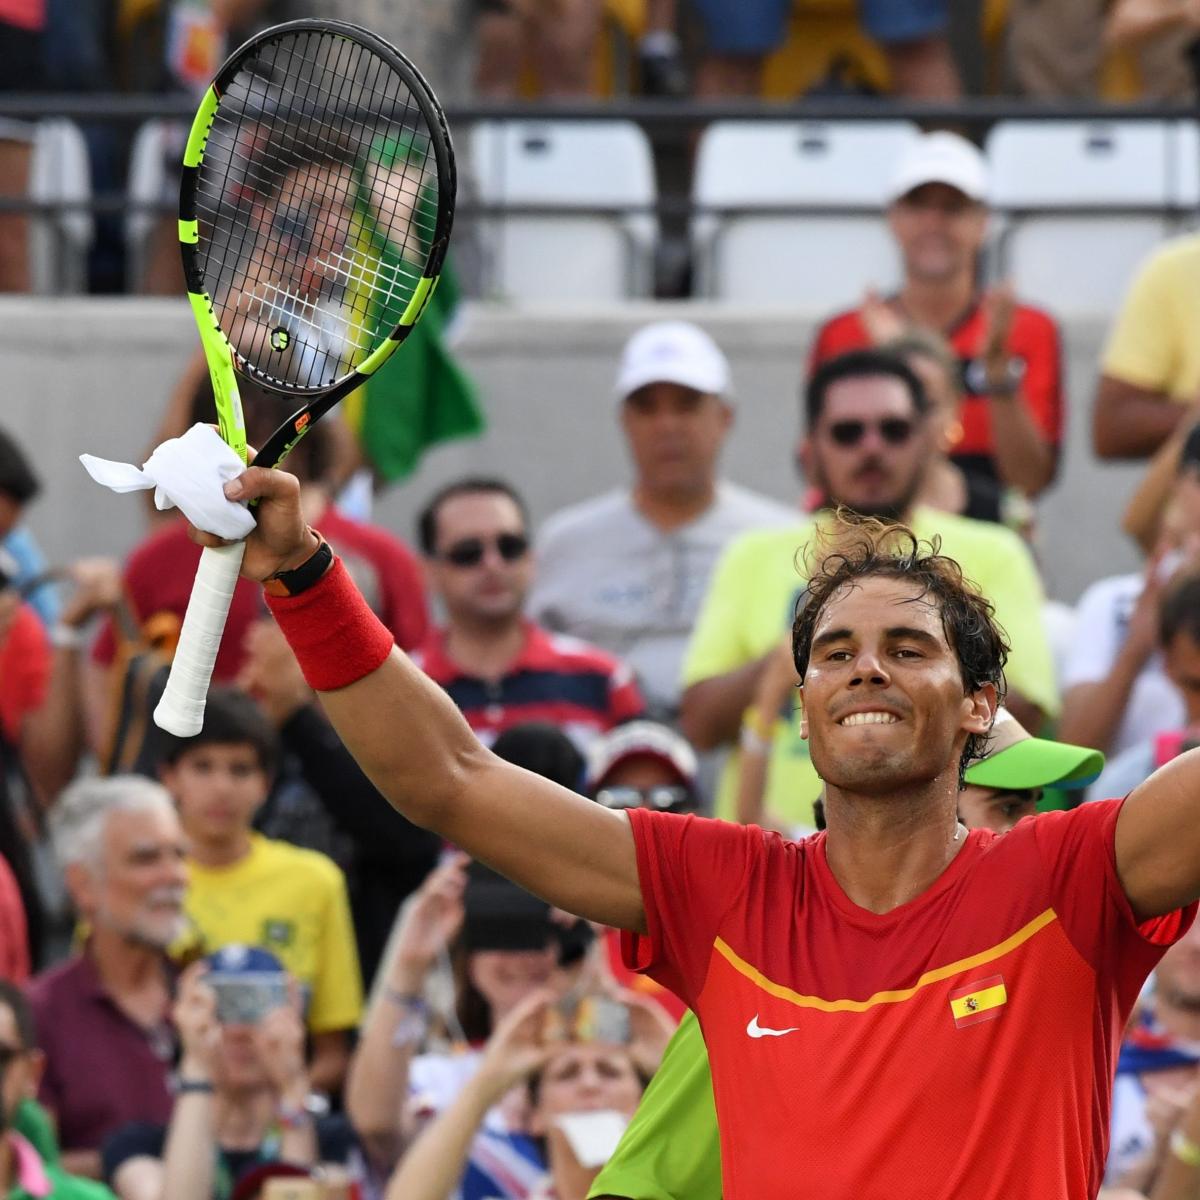 Olympic Tennis 2016: Breaking Down Rafael Nadal's Chances to Win Gold Medal